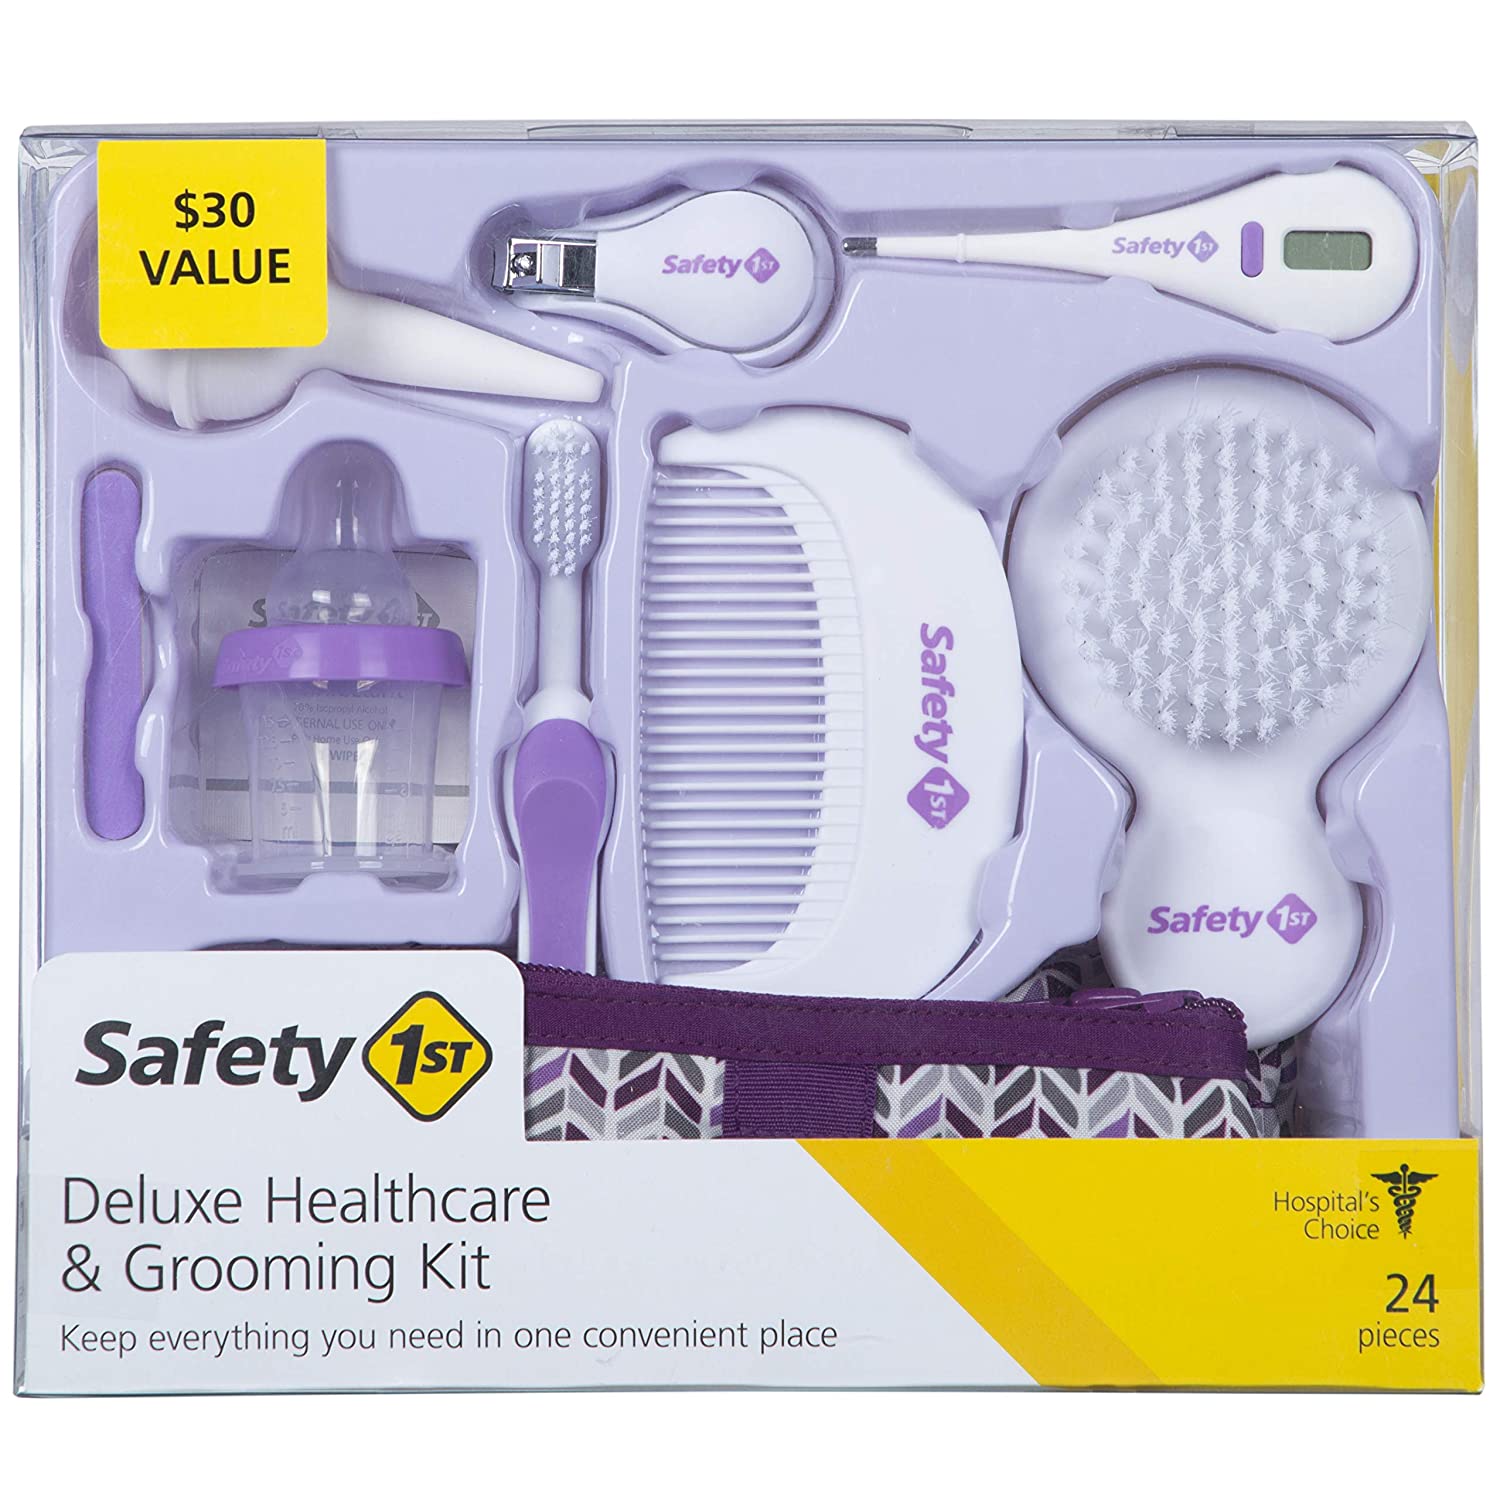 DLX HEALTHCARE  GROOMING KIT